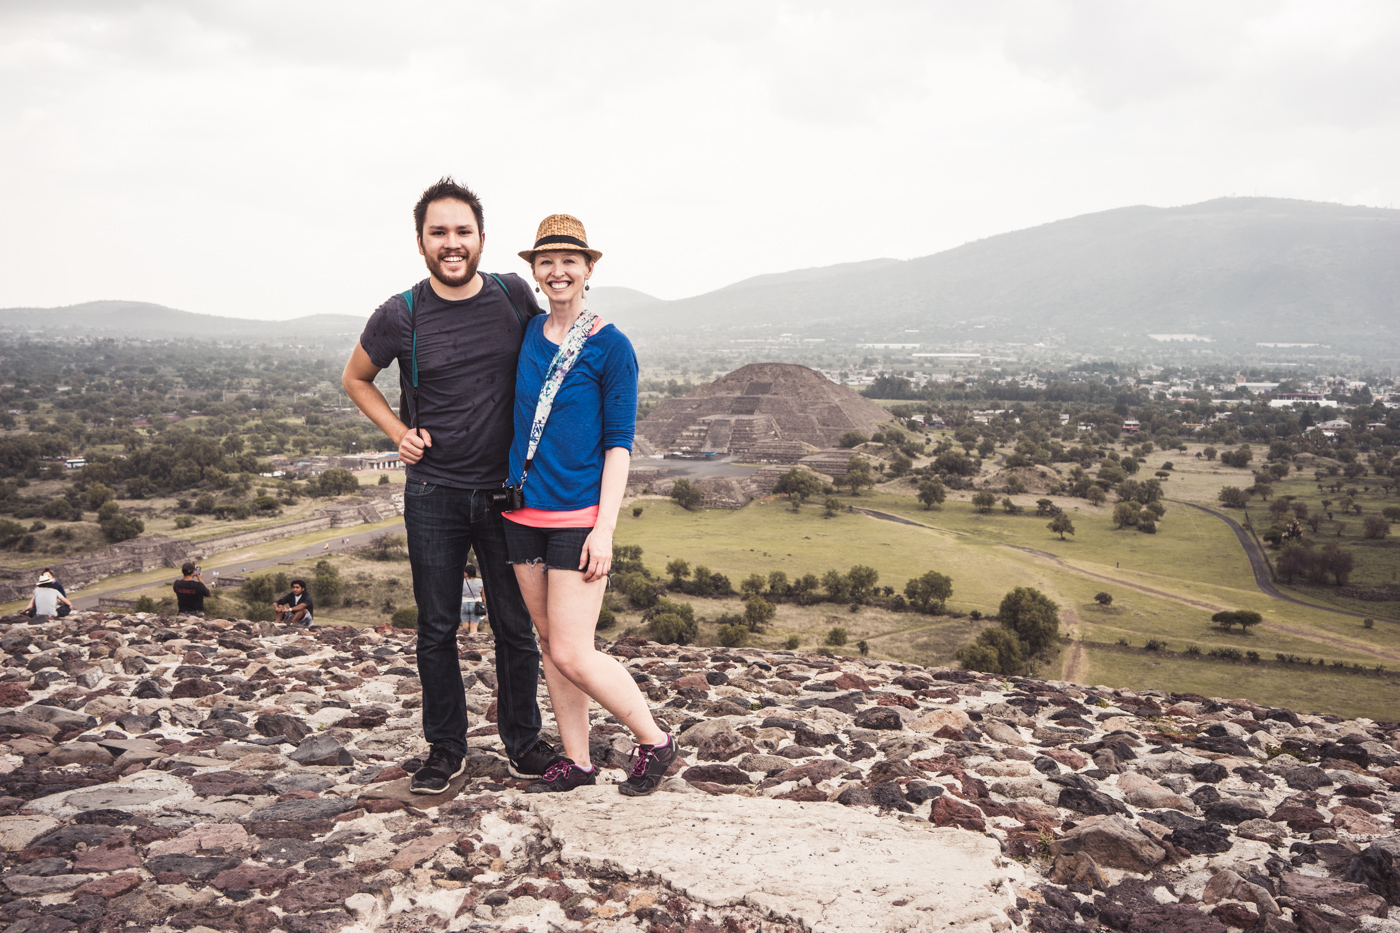 on top of the Pyramid of the Sun, view of Pyramid of the Moon, Teotihuacán, Mexico